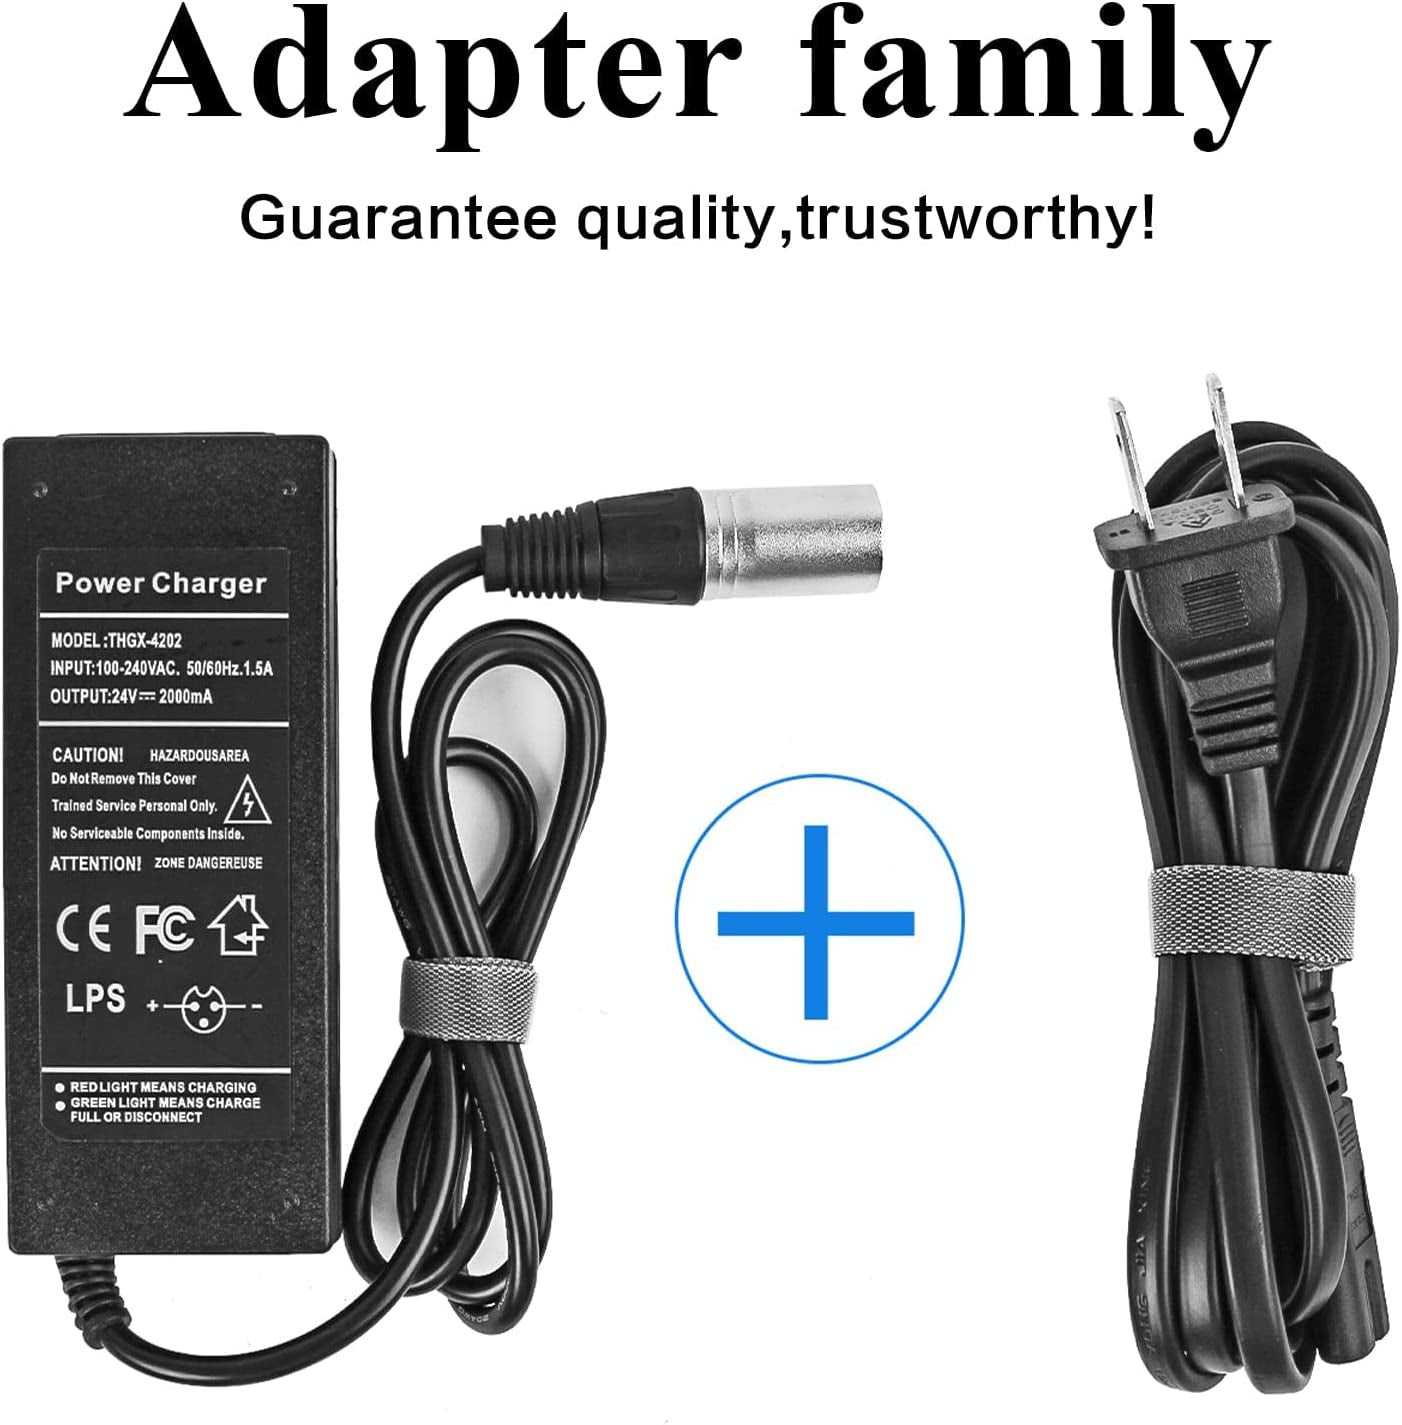 24V 2A 3-Pin XLR Connector Electronic Scooter Battery Charger for Go-Go  Elite Traveller,Pride Mobility,Jazzy Power Chair Battery Charger & Plus  Ezip Mountain Trailz (with 3.9ft US Power Cord )